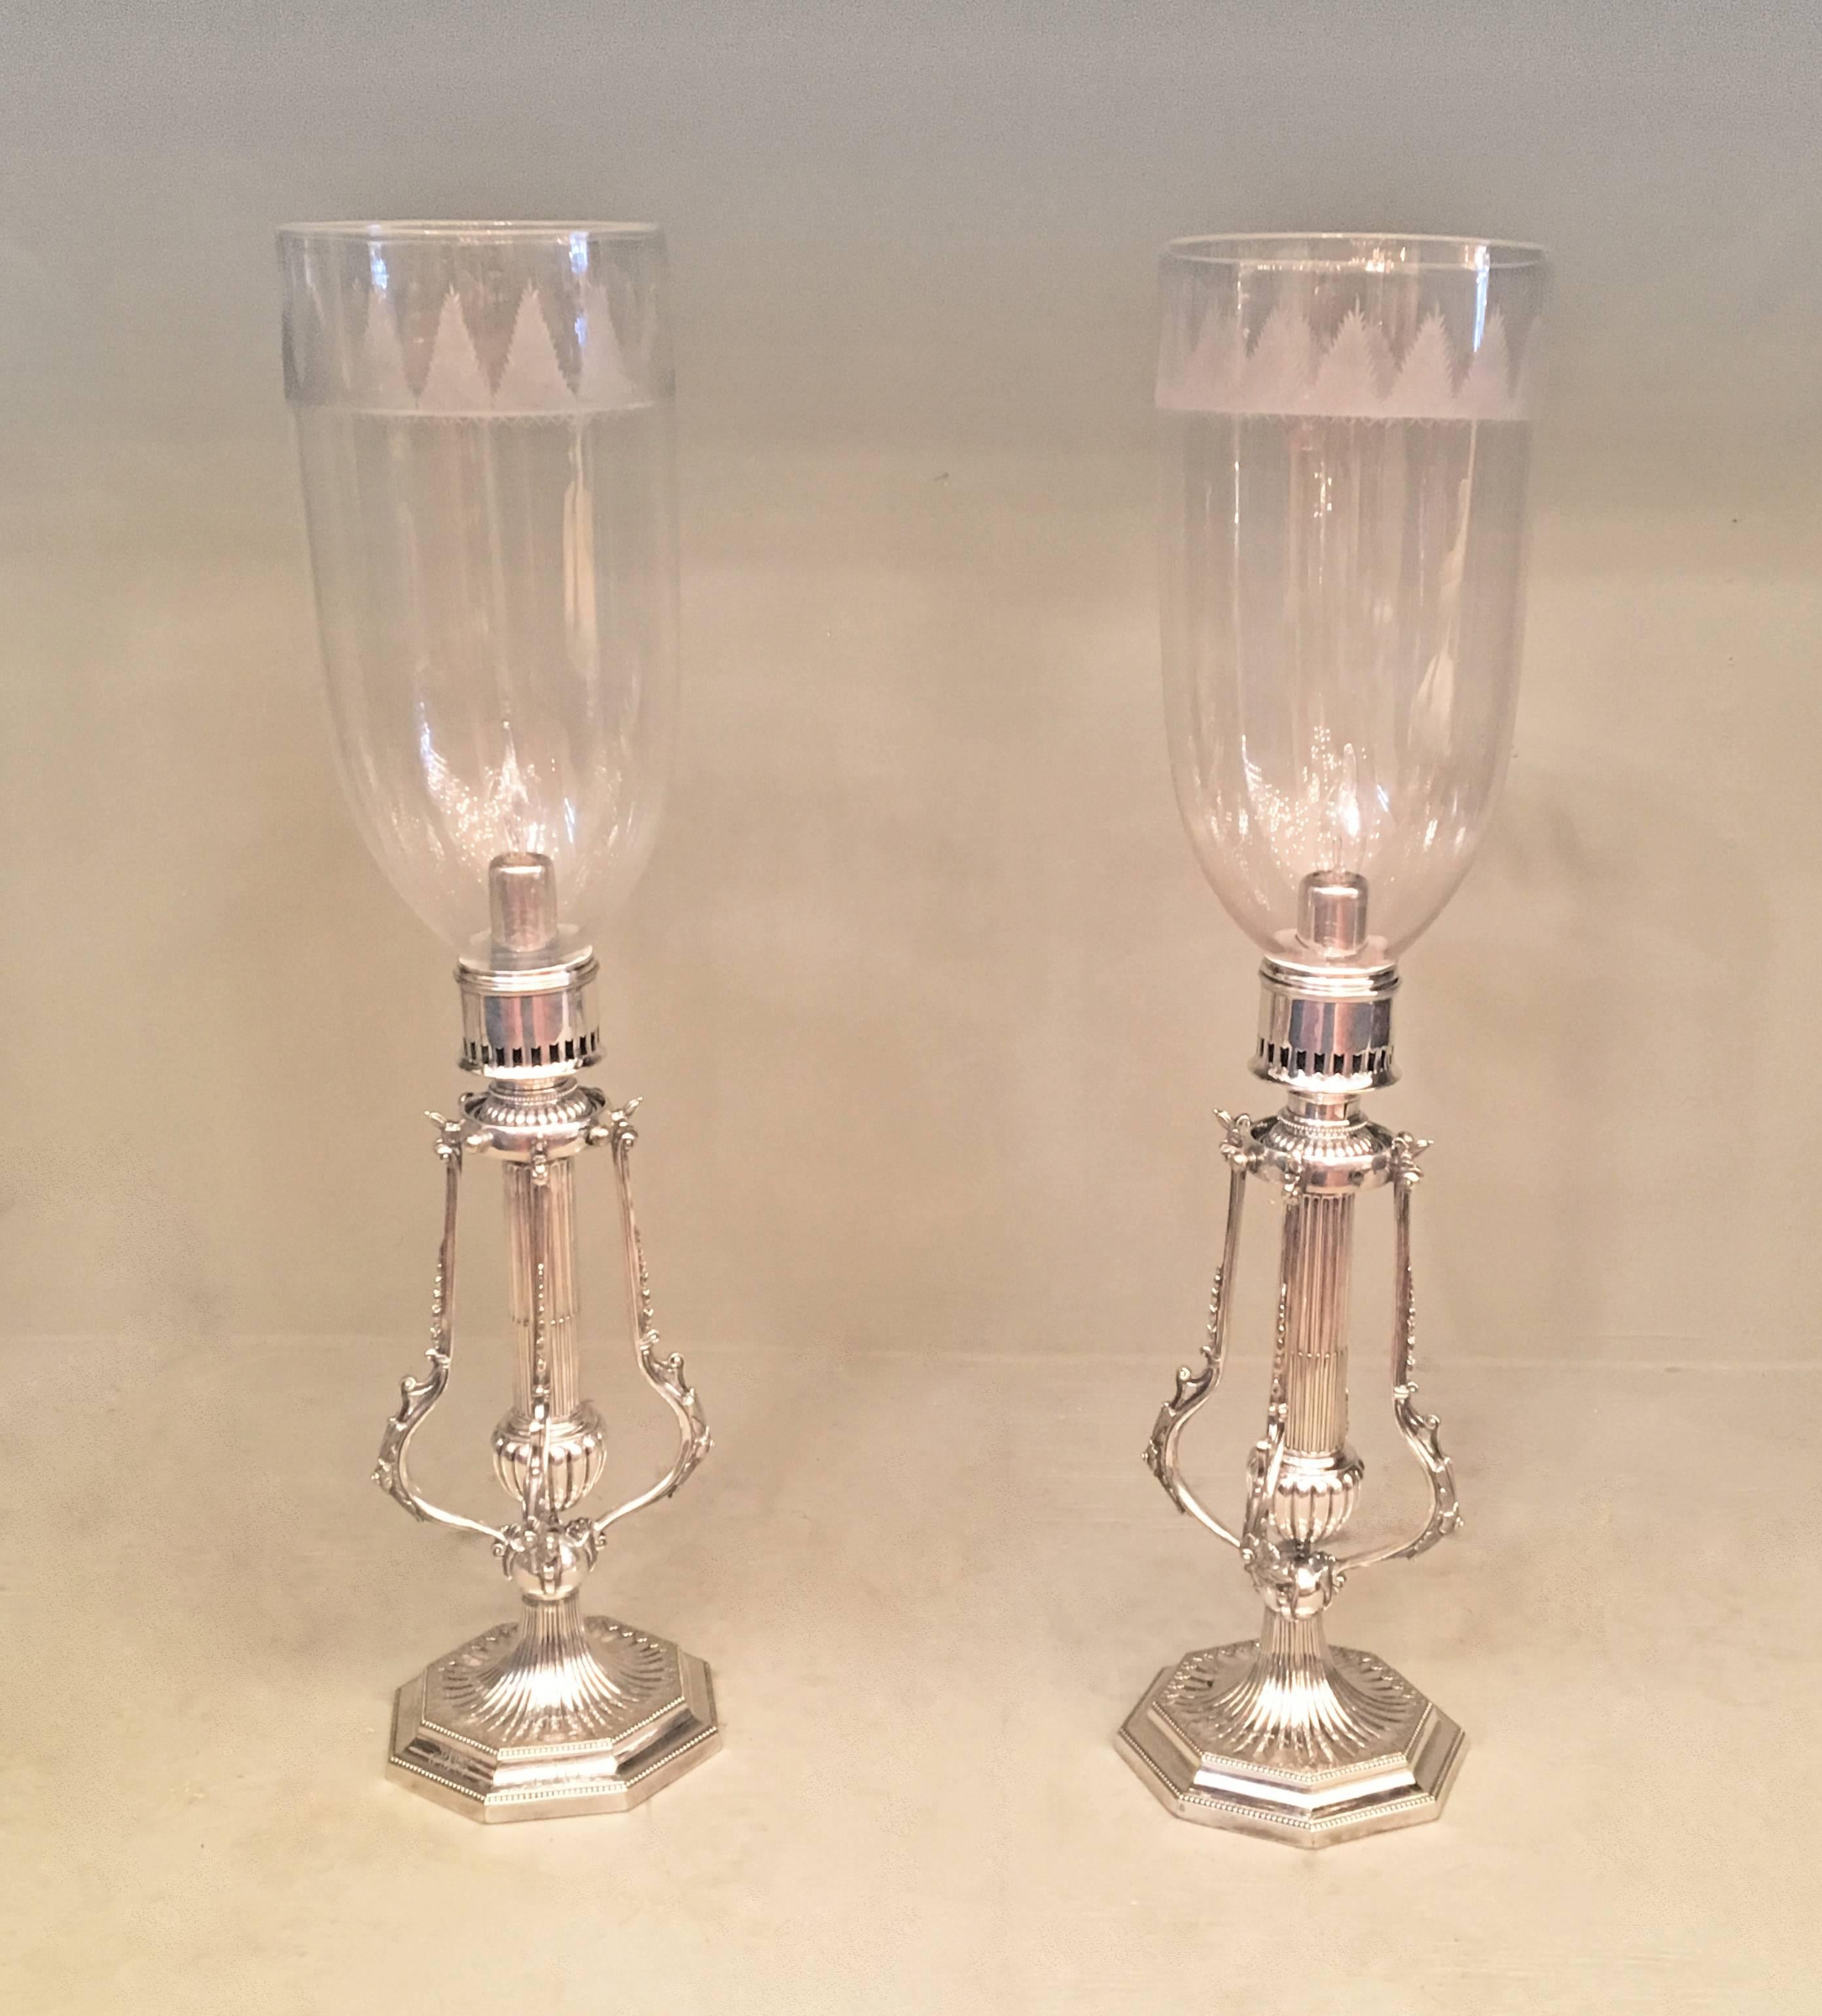 Pair of 19th century English Regency Hurricane candlesticks with savers that were made to pivot with the motion of the ship. Silver plated base monogrammed with three generations as they were passed down.